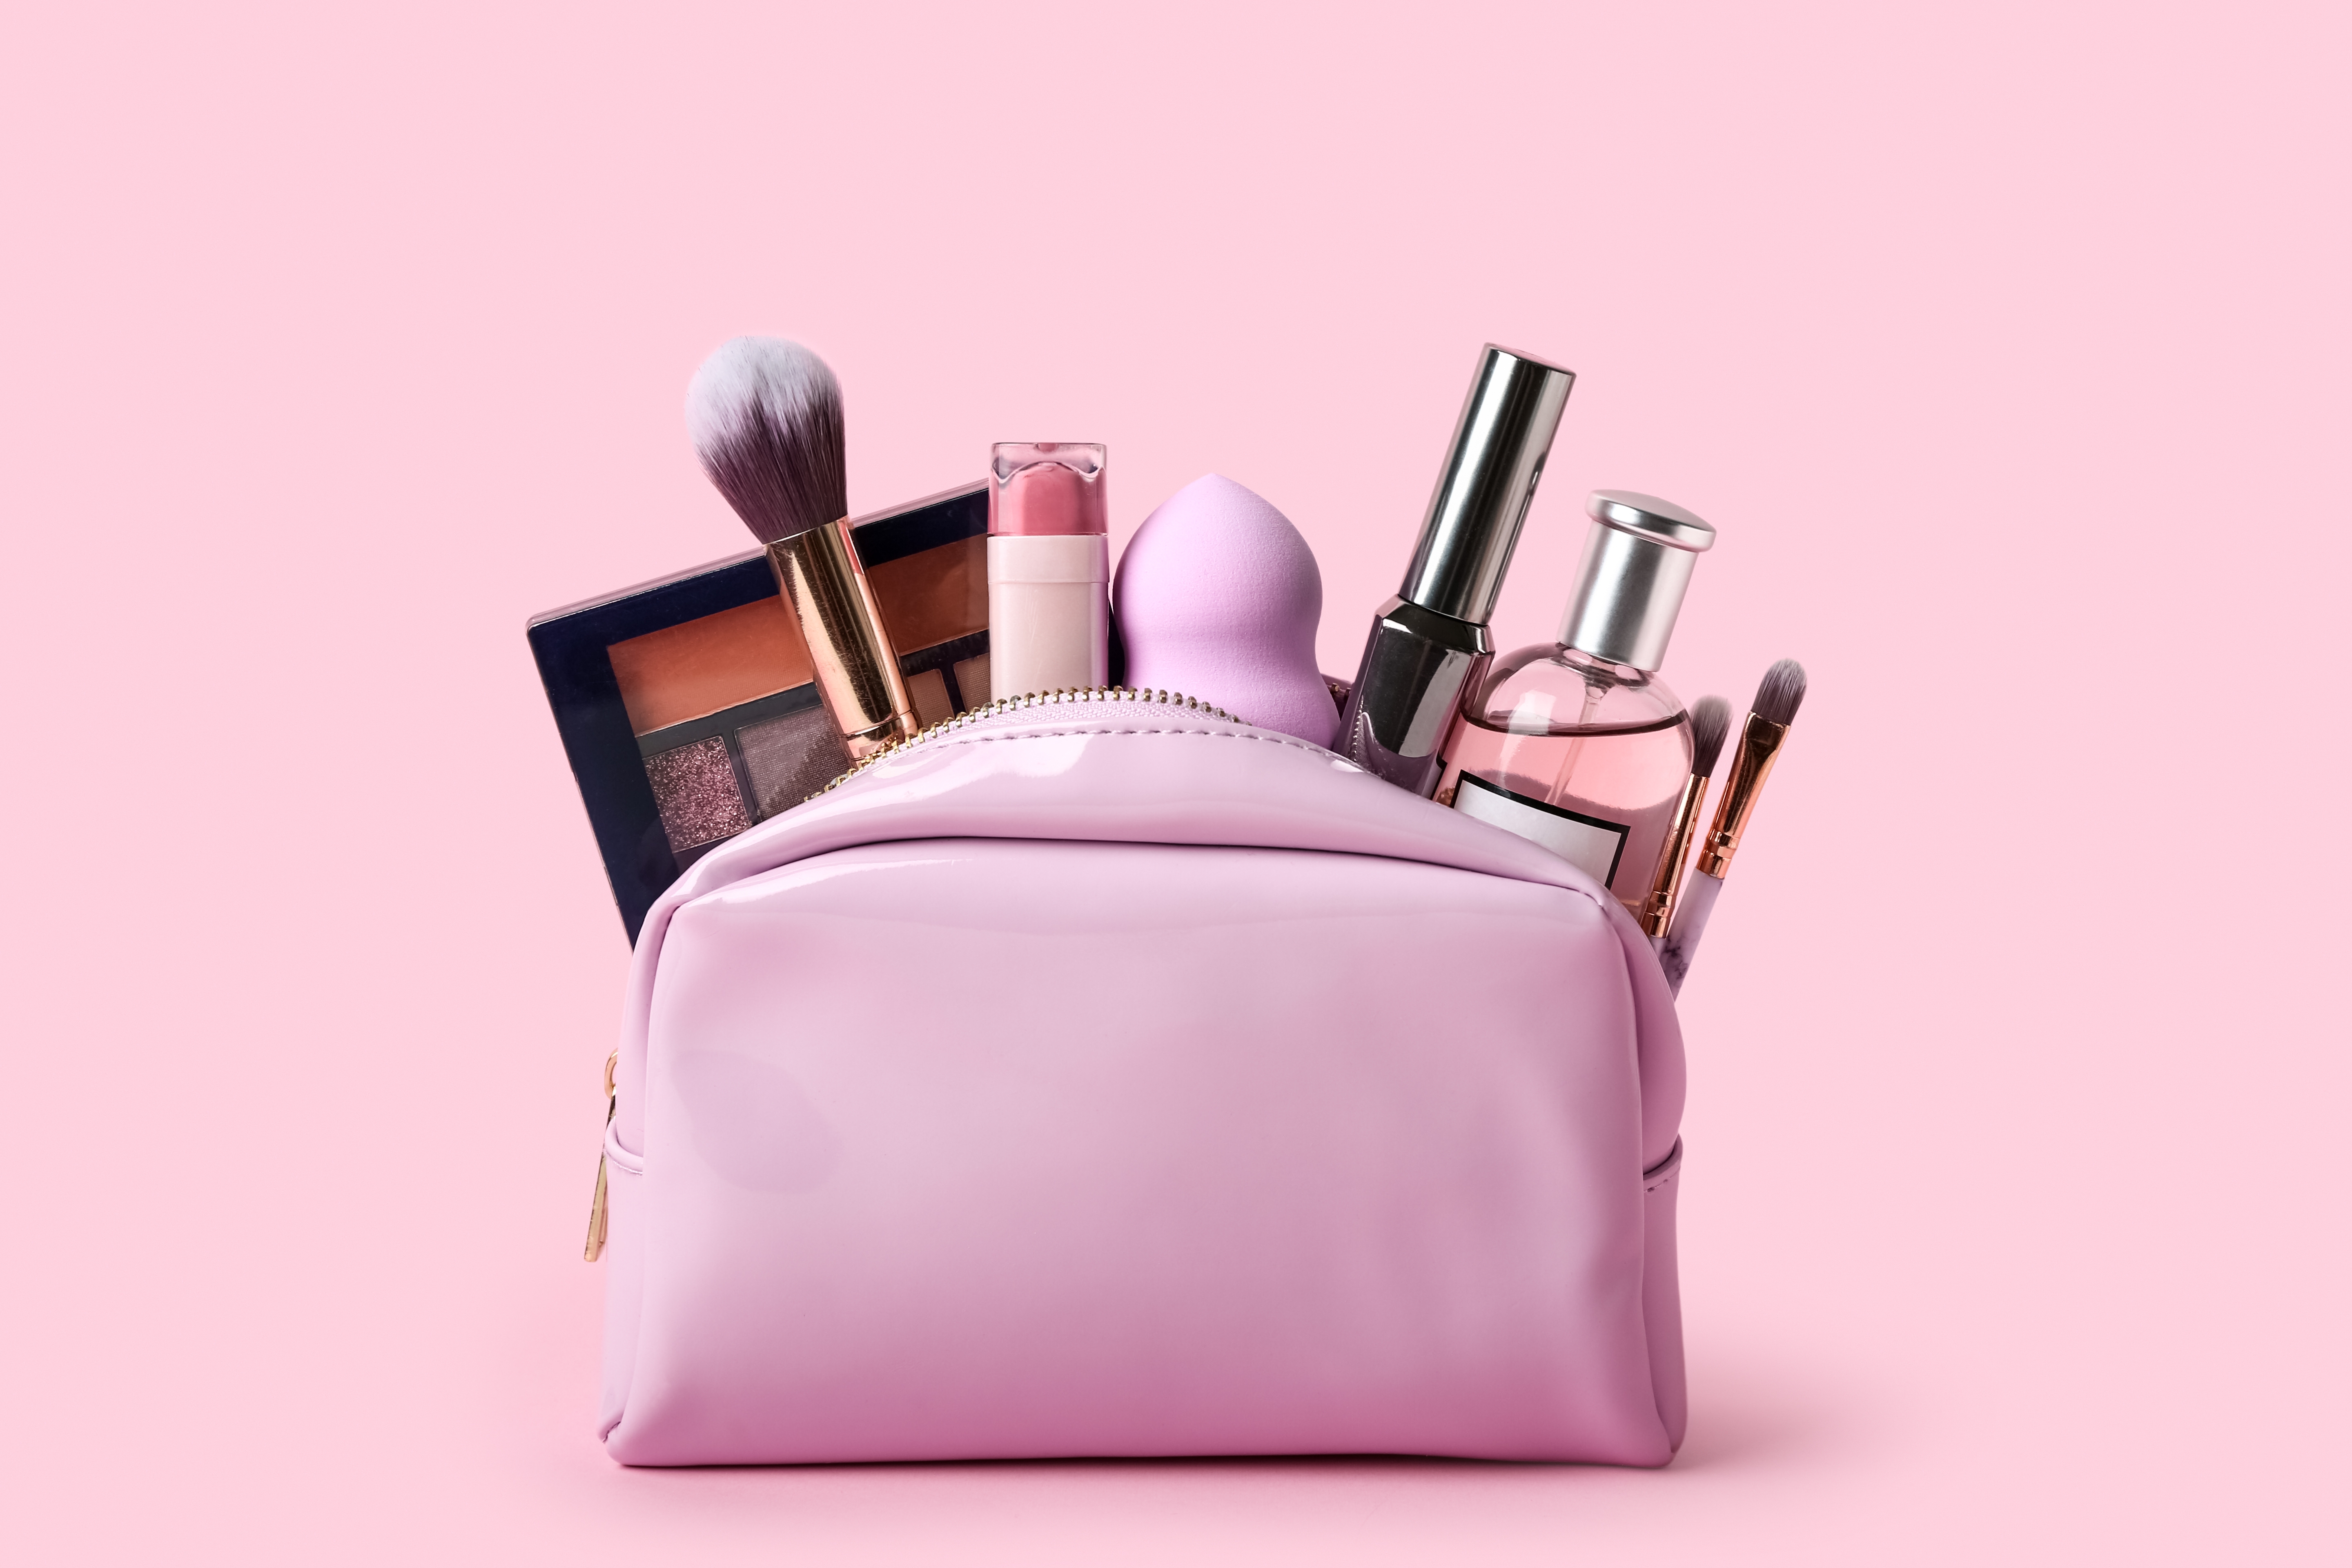 A pink makeup bag filled with beauty products | Source: Shutterstock